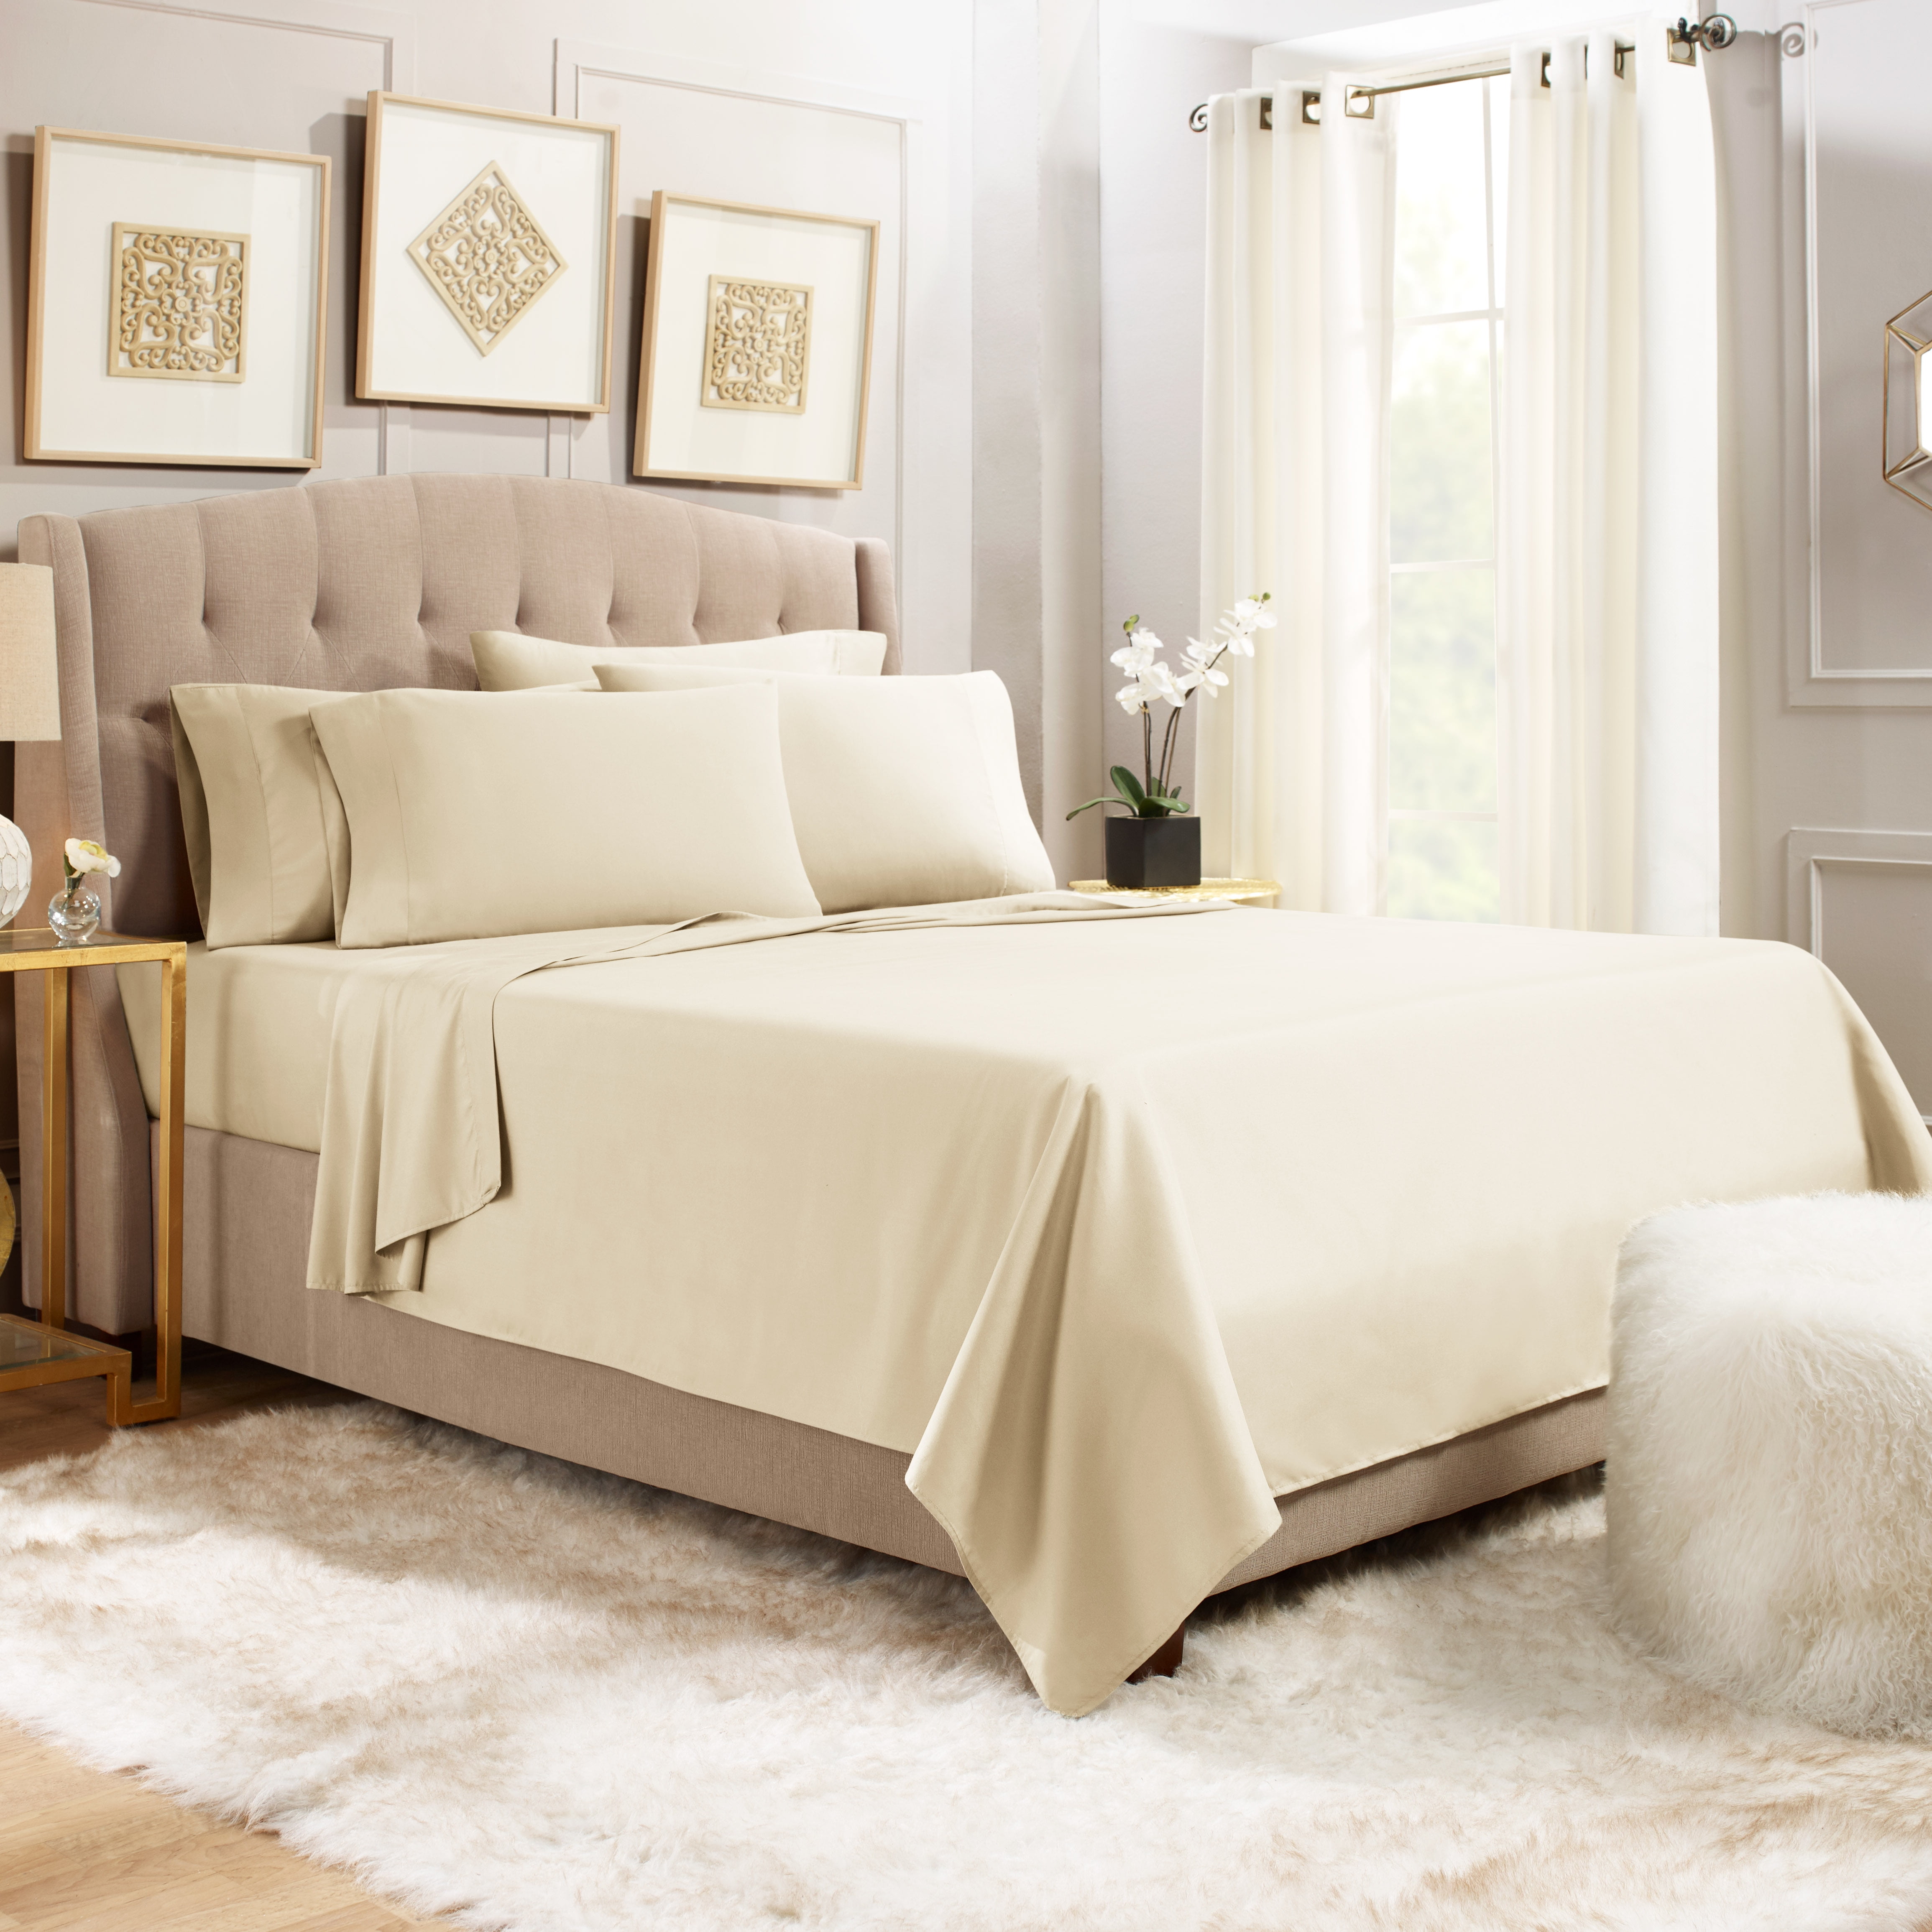 Details about   NEW Silky Metallic Gold Blush Grey Charmeuse 7 pcs Cal King Queen Comforter set 